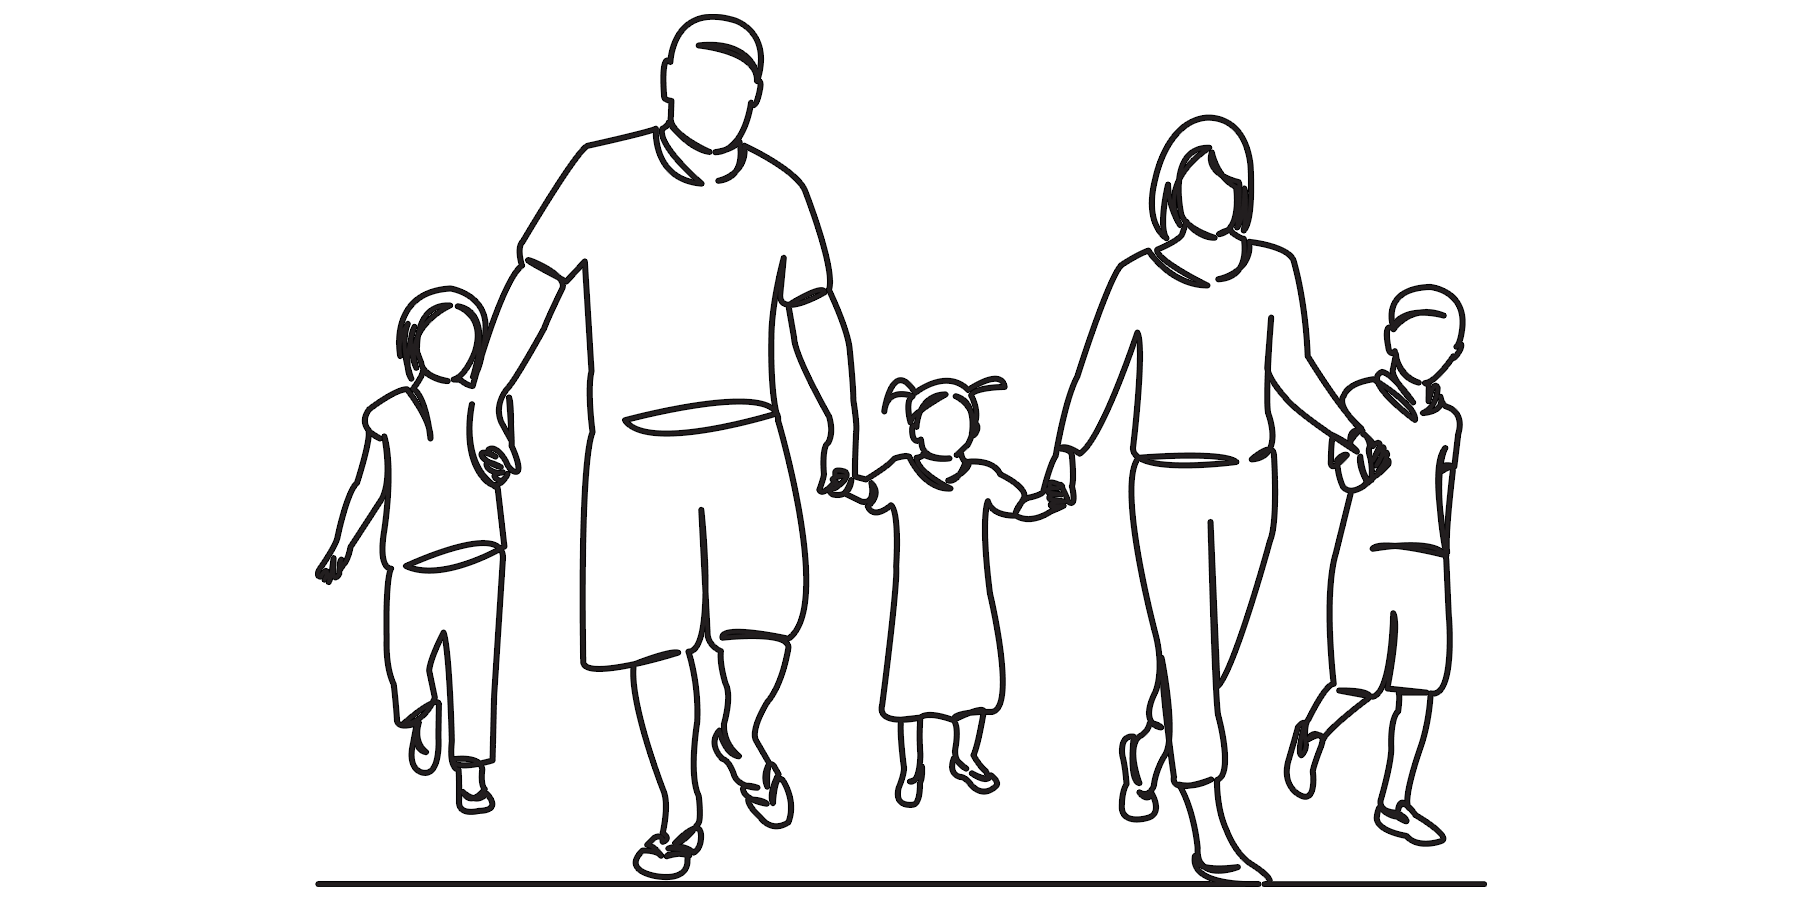 Illustration of father,mother and children walking